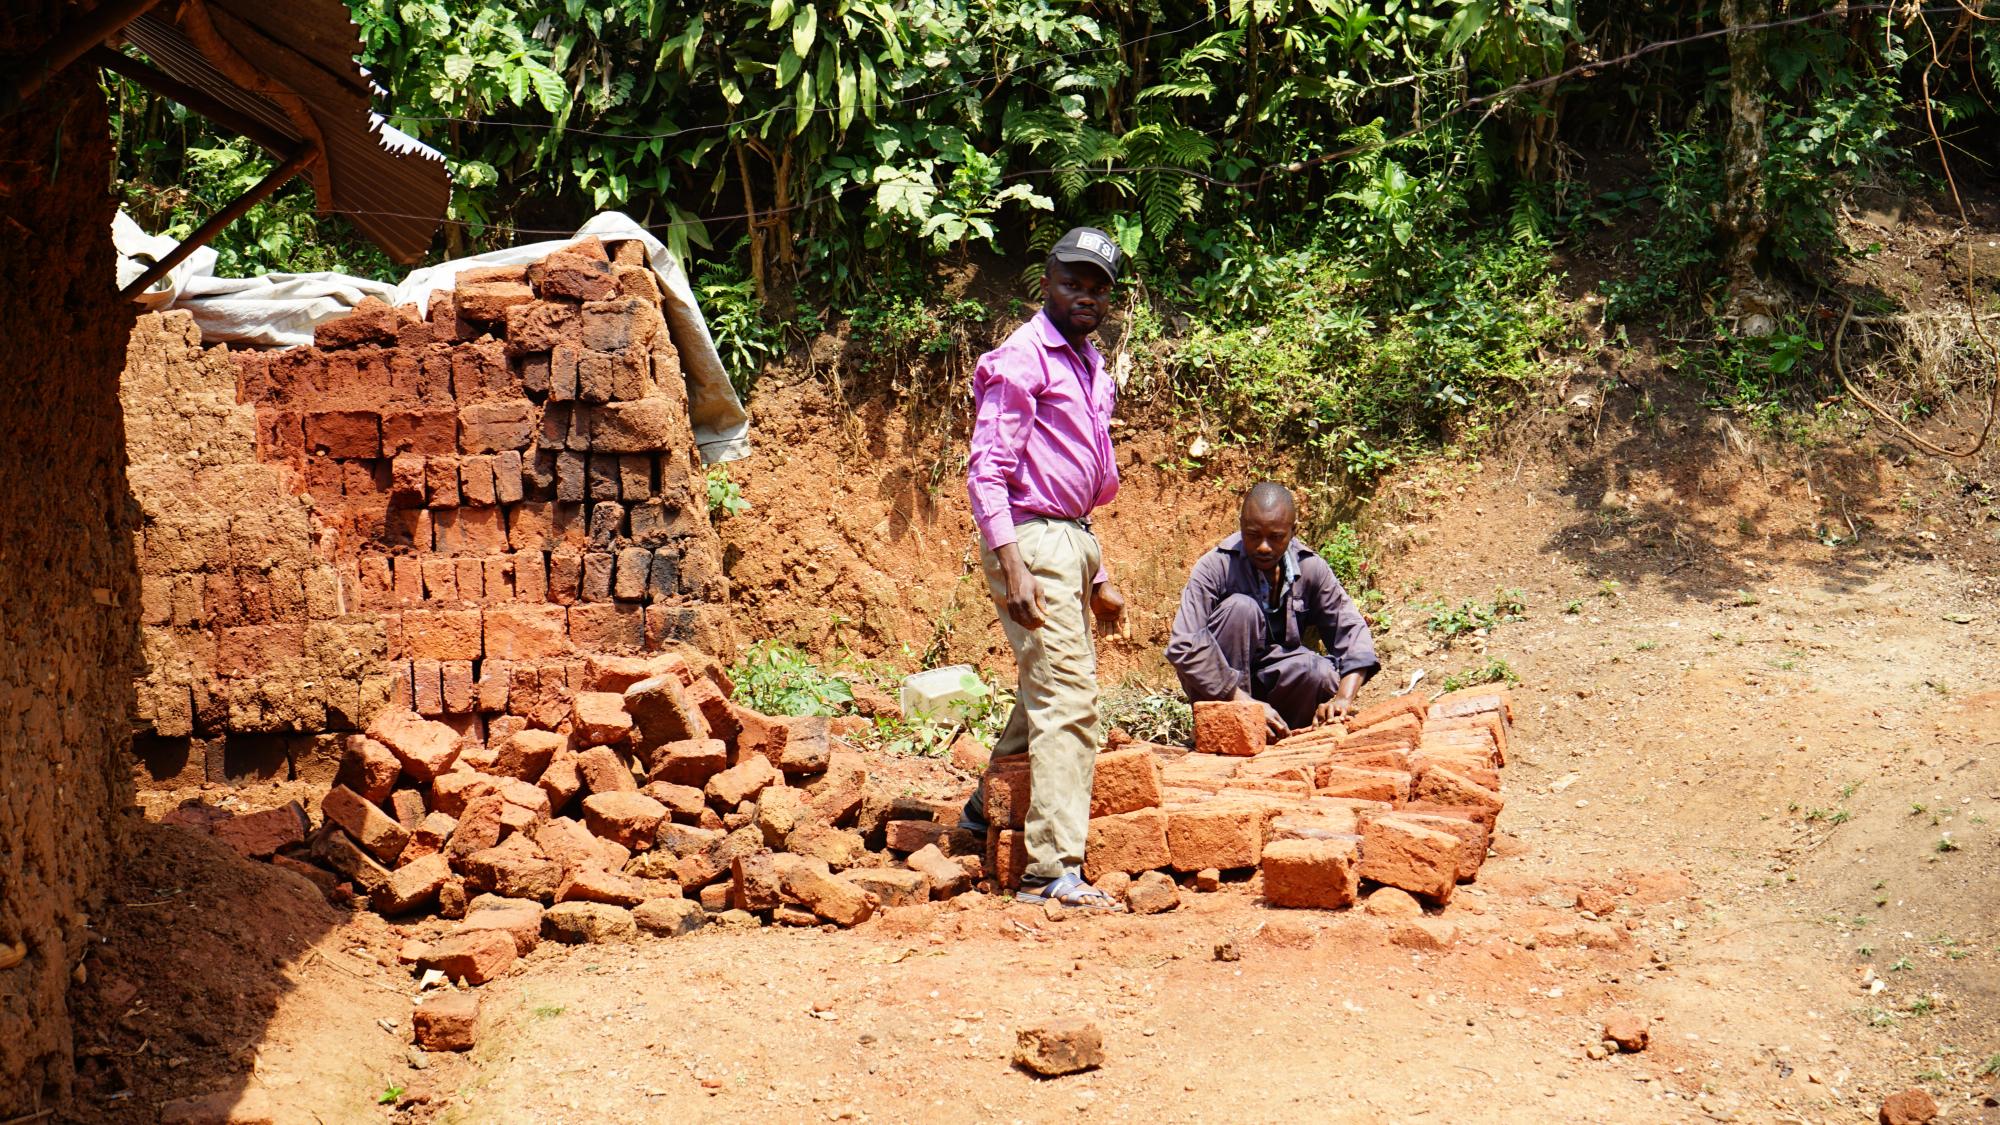 Photo 6: The brick production as an additional family income, village in Uganda 2022.